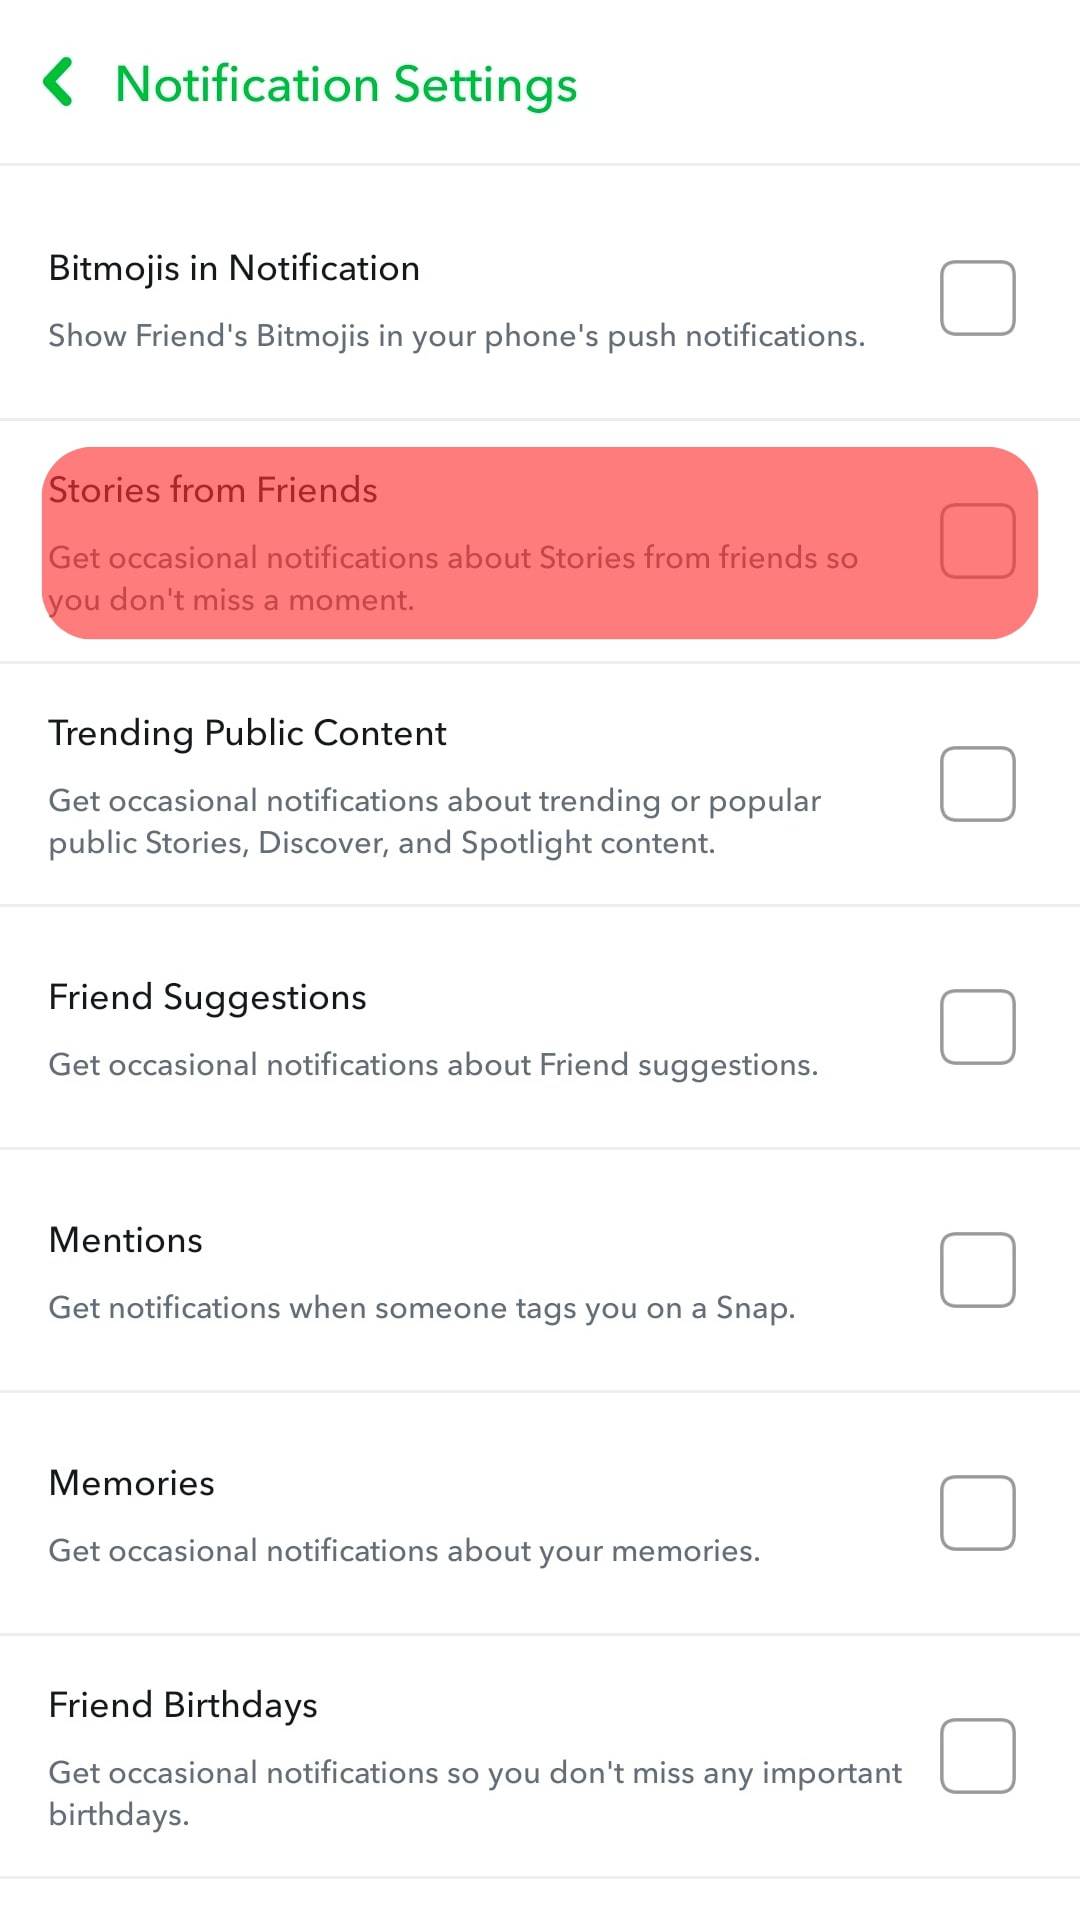 Toggle On Stories From Friends